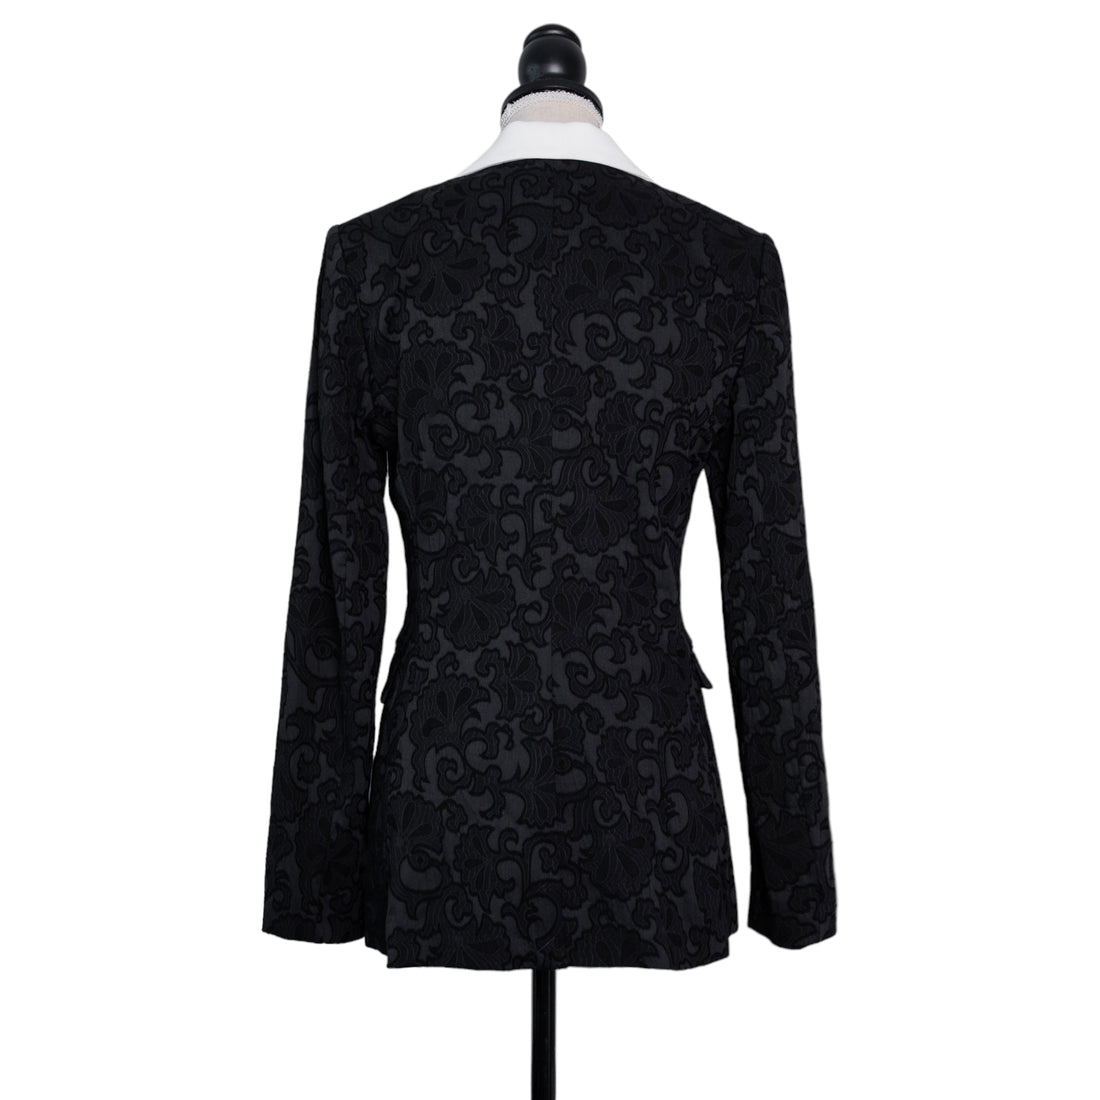 Alice+Olivia blazer with floral embroidery